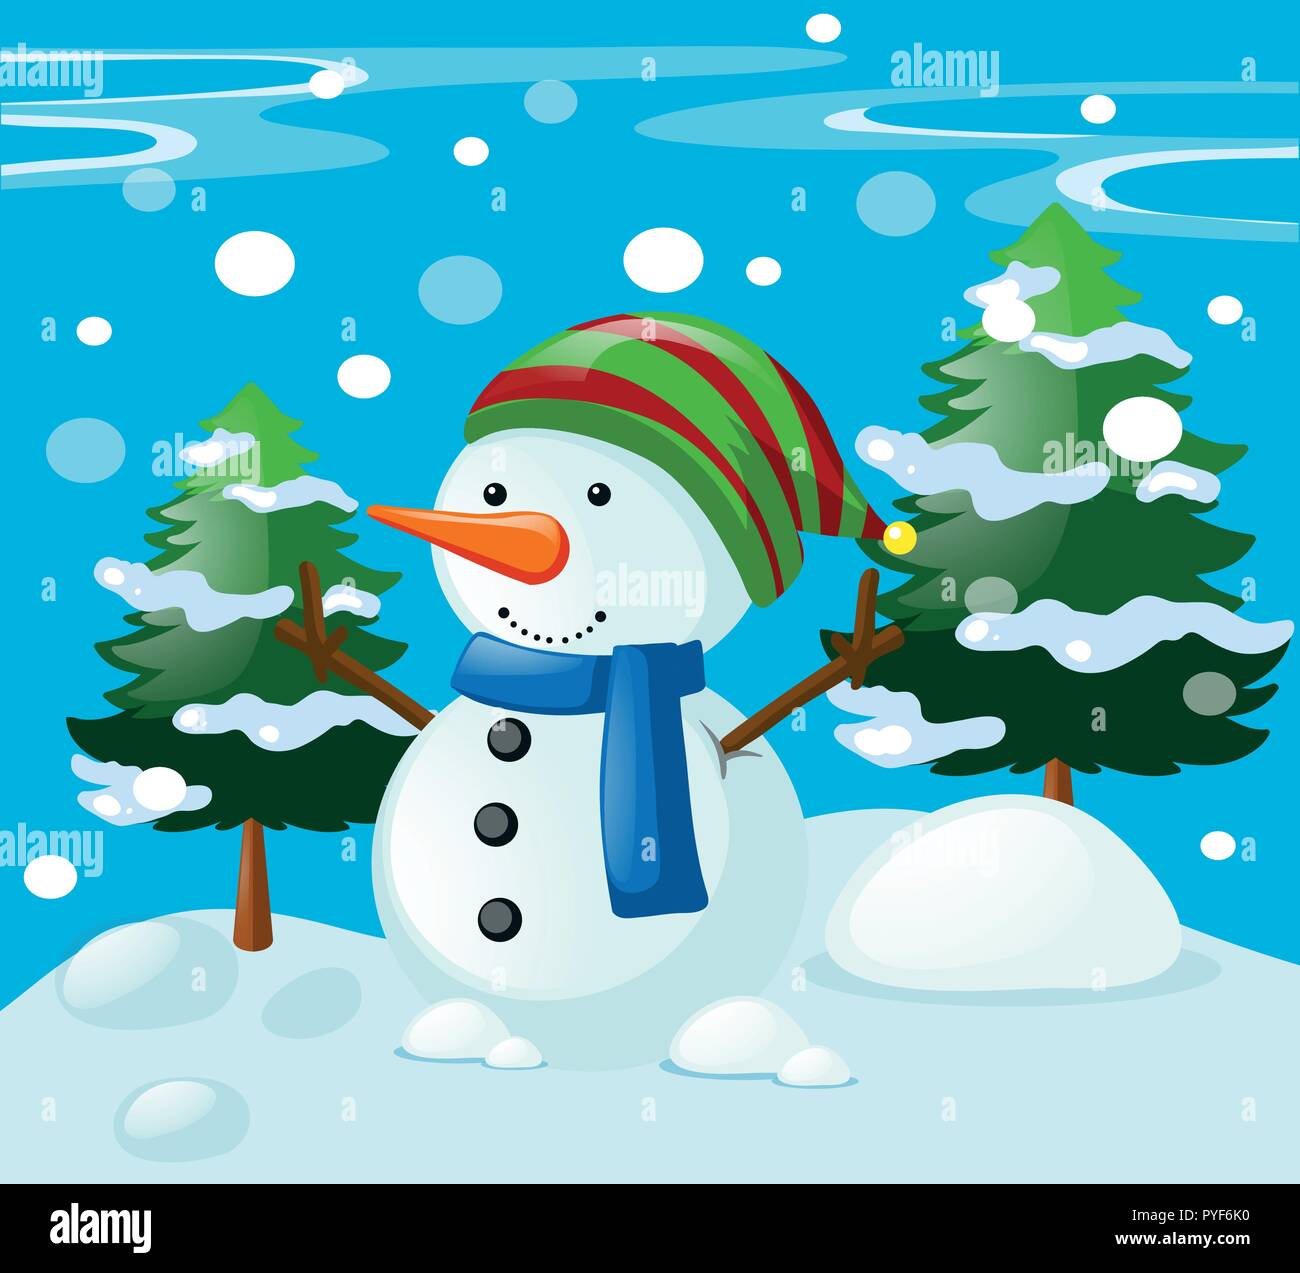 Winter Scene With Snowman In The Field Illustration Stock Vector Image